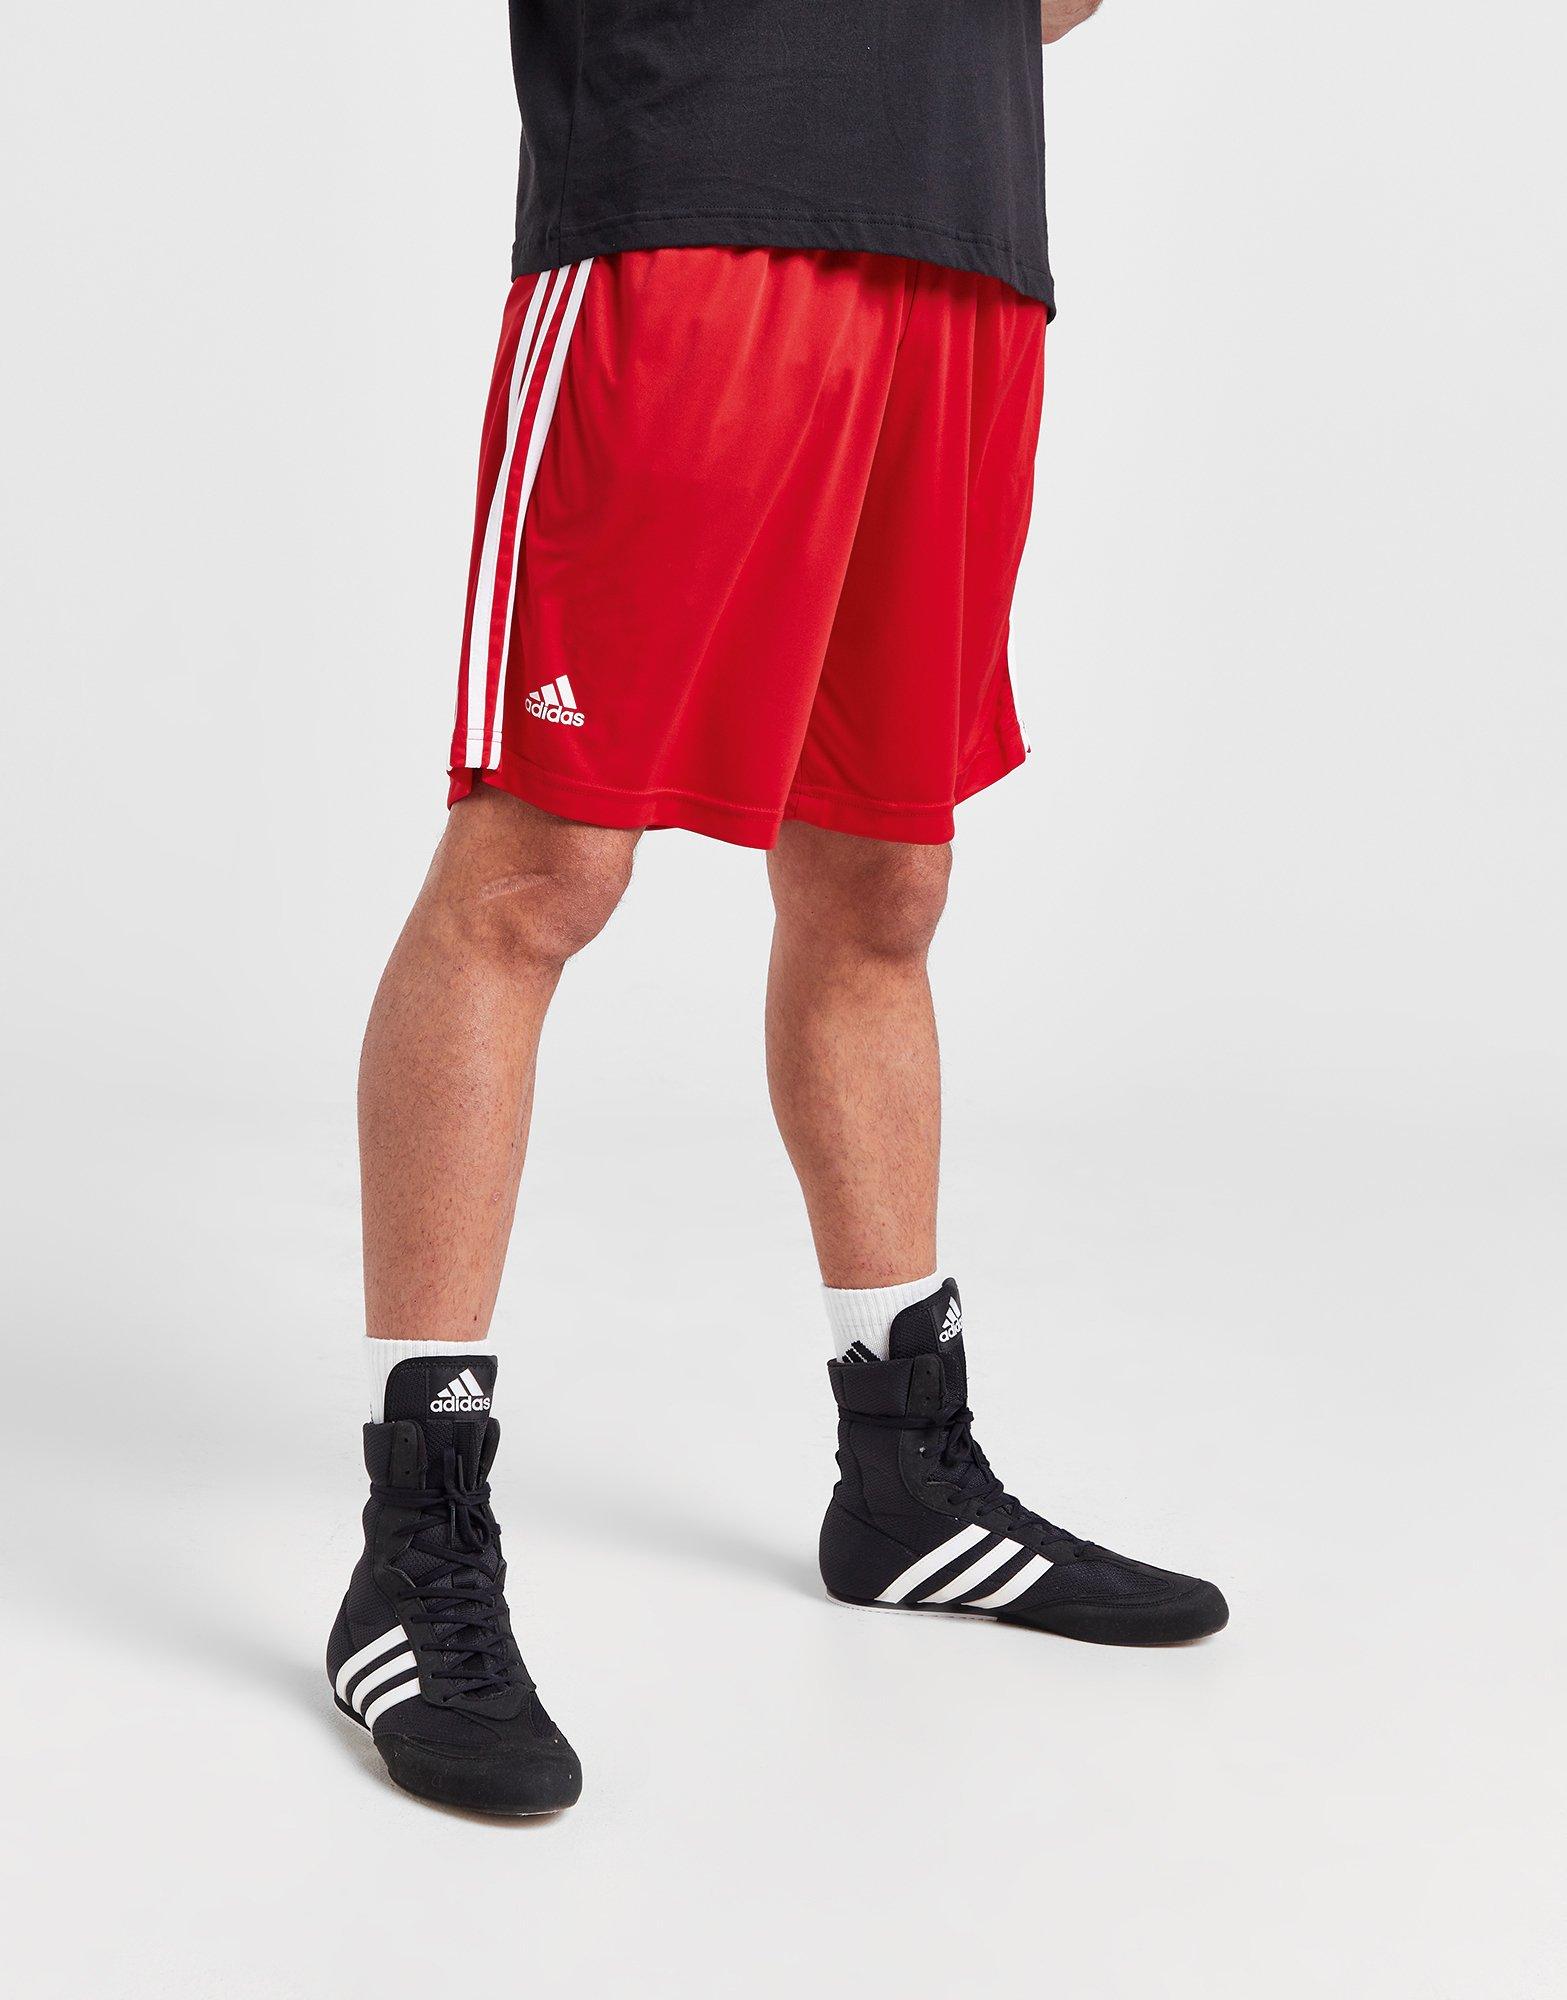 Score Opstand Symmetrie Red adidas Base Punch Boxing Shorts | JD Sports Global